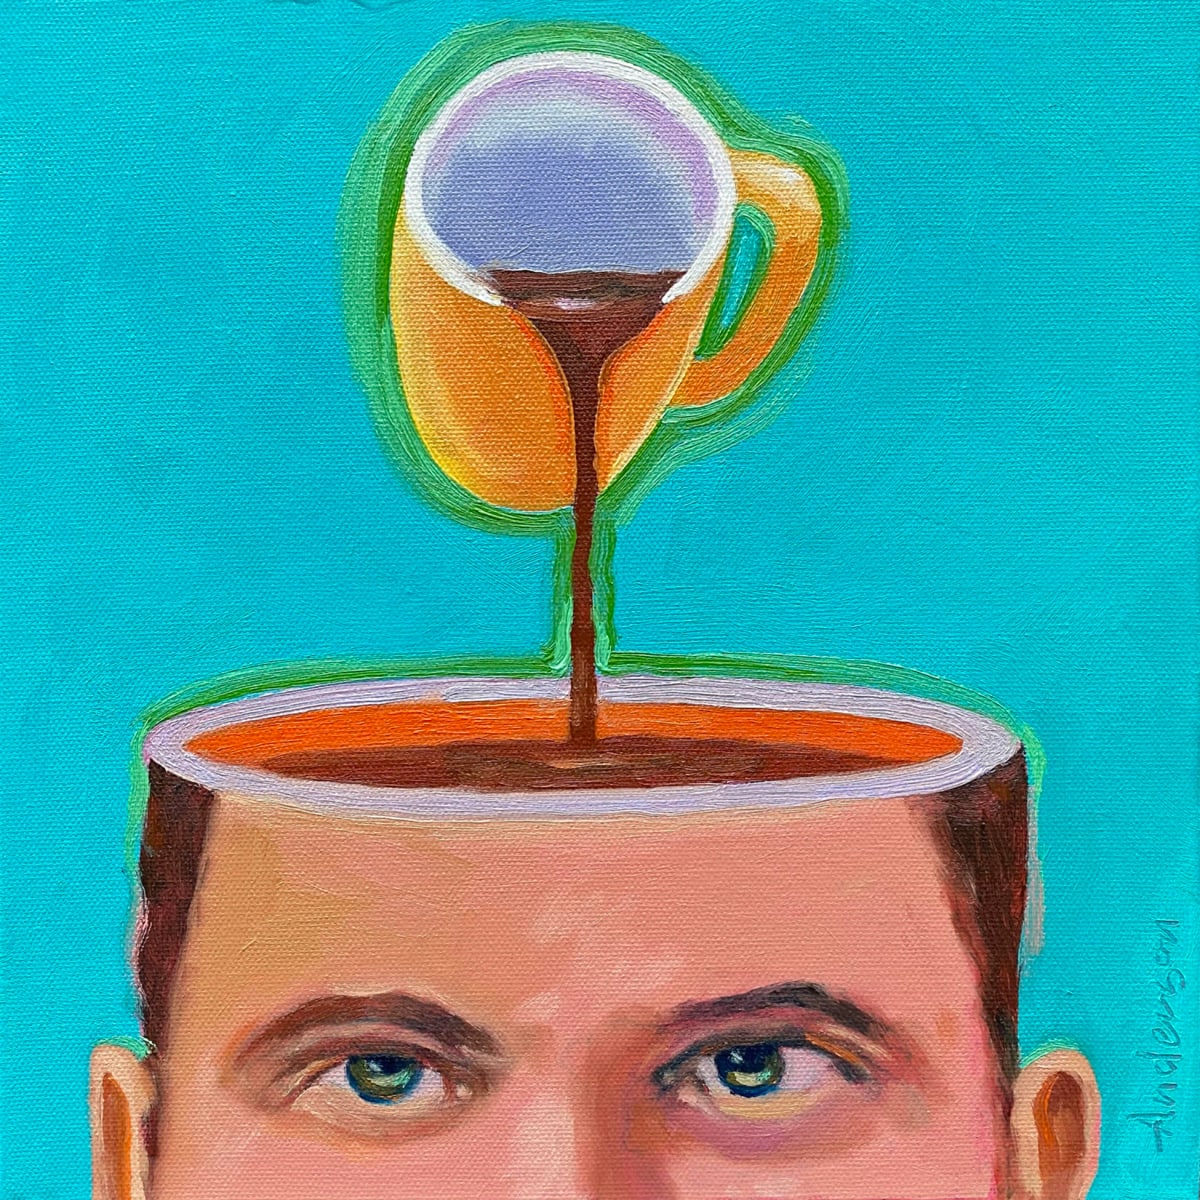 Pour Me Another Cup by Michael Anderson 